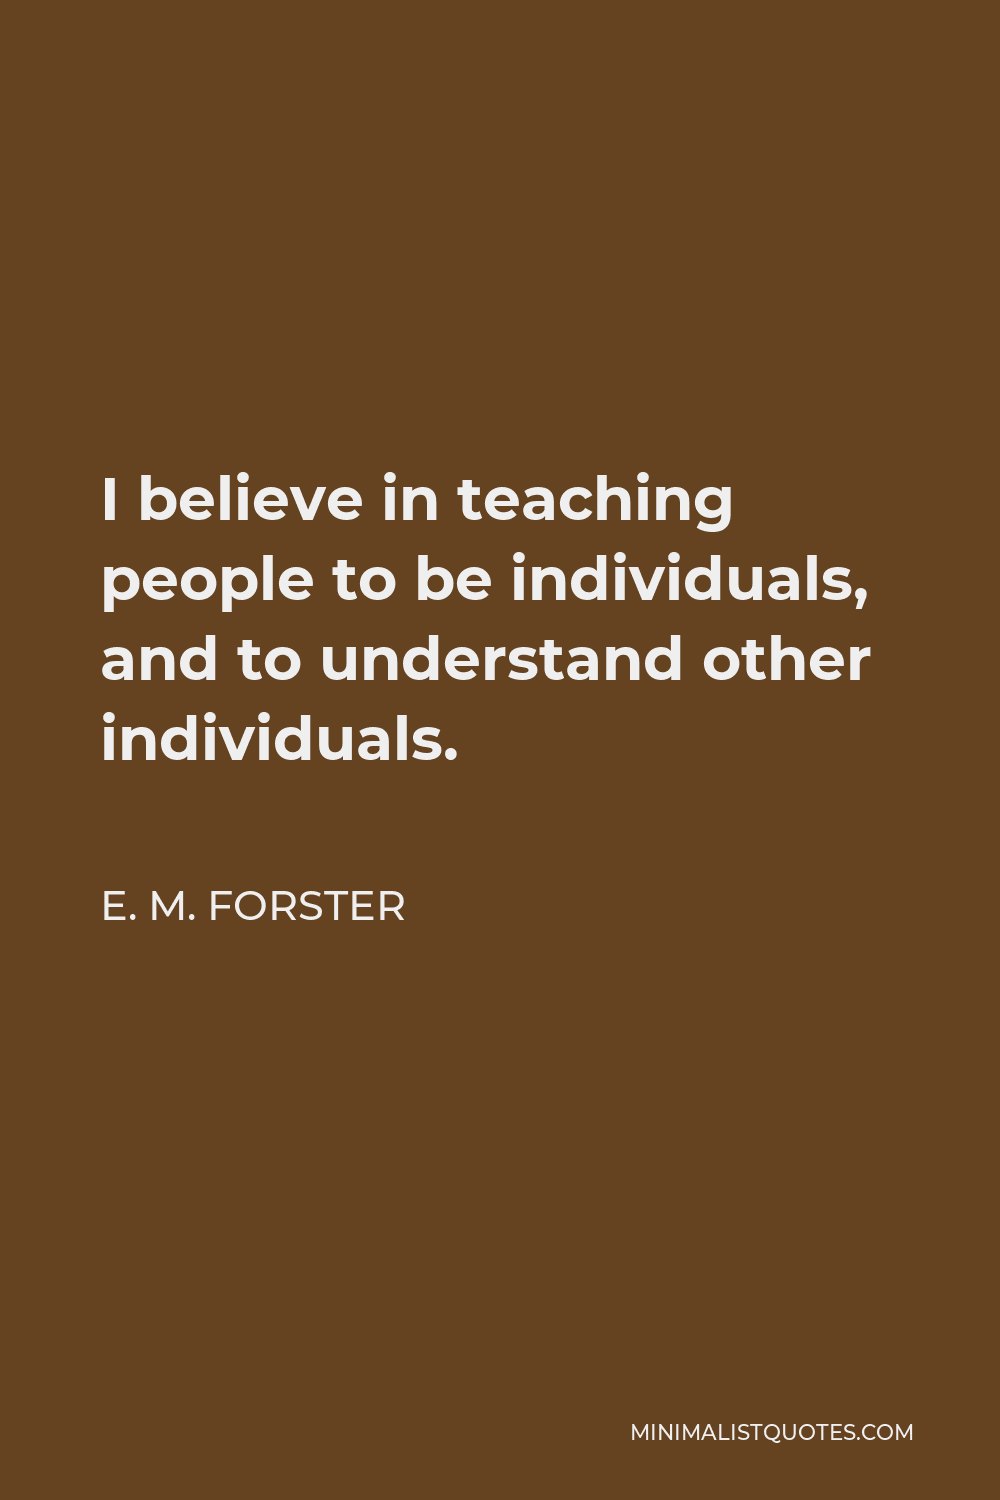 E. M. Forster Quote - I believe in teaching people to be individuals, and to understand other individuals.